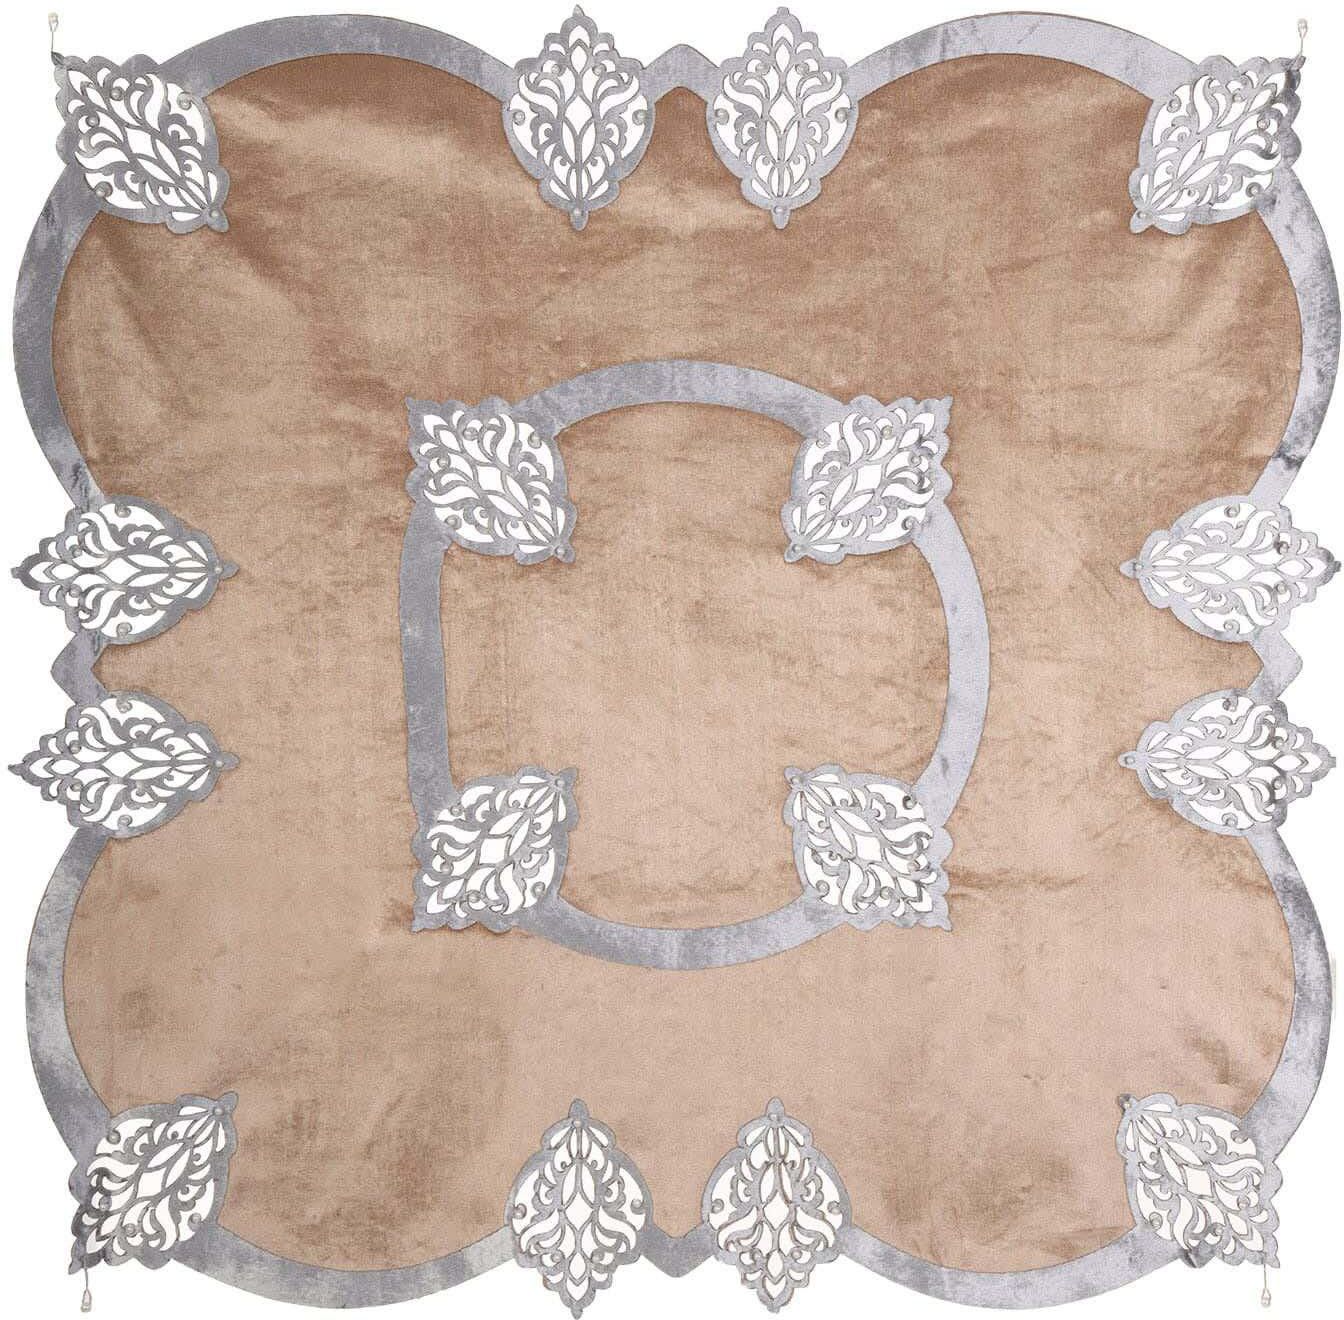 Get Velvet Square Tablecloth, 90×90 cm, approximately 250 gram - Gold Silver with best offers | Raneen.com